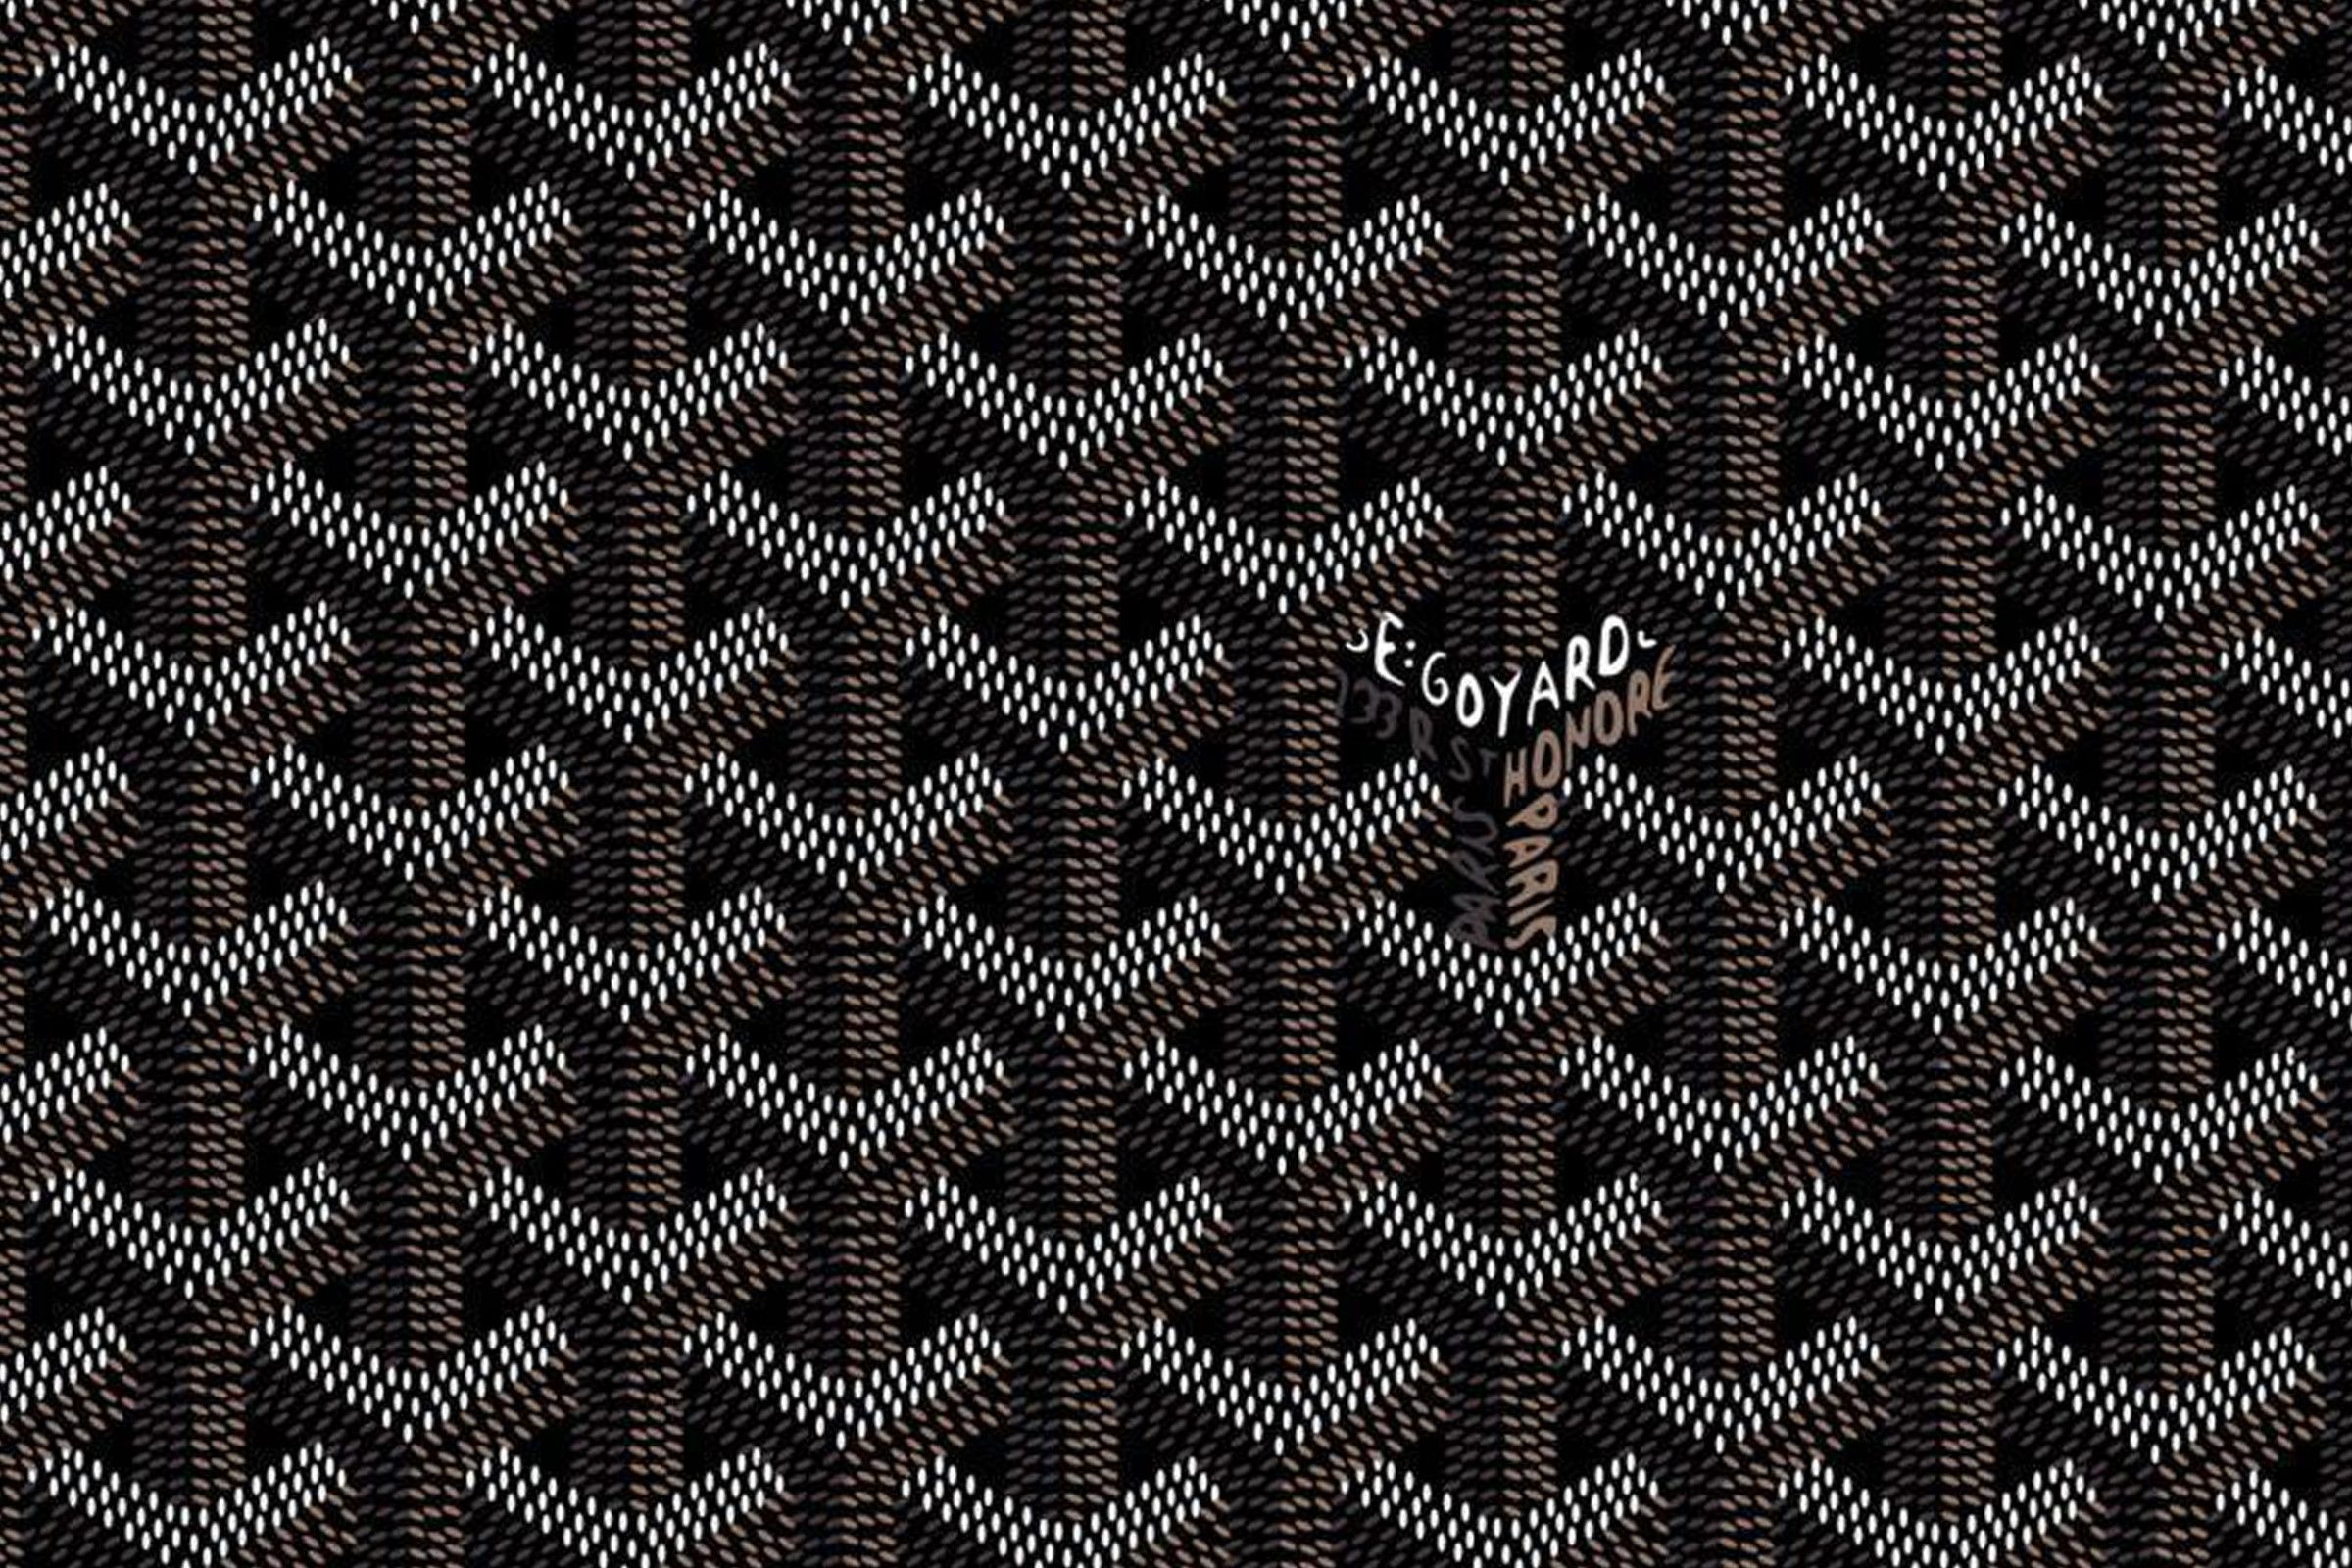 THE HEART OF GOYARD Ever since the foundation of the Maison in 1853, the  Goyard workshops have perfected an unparalleled “Art du Marquage”, as  this, By Maison Goyard